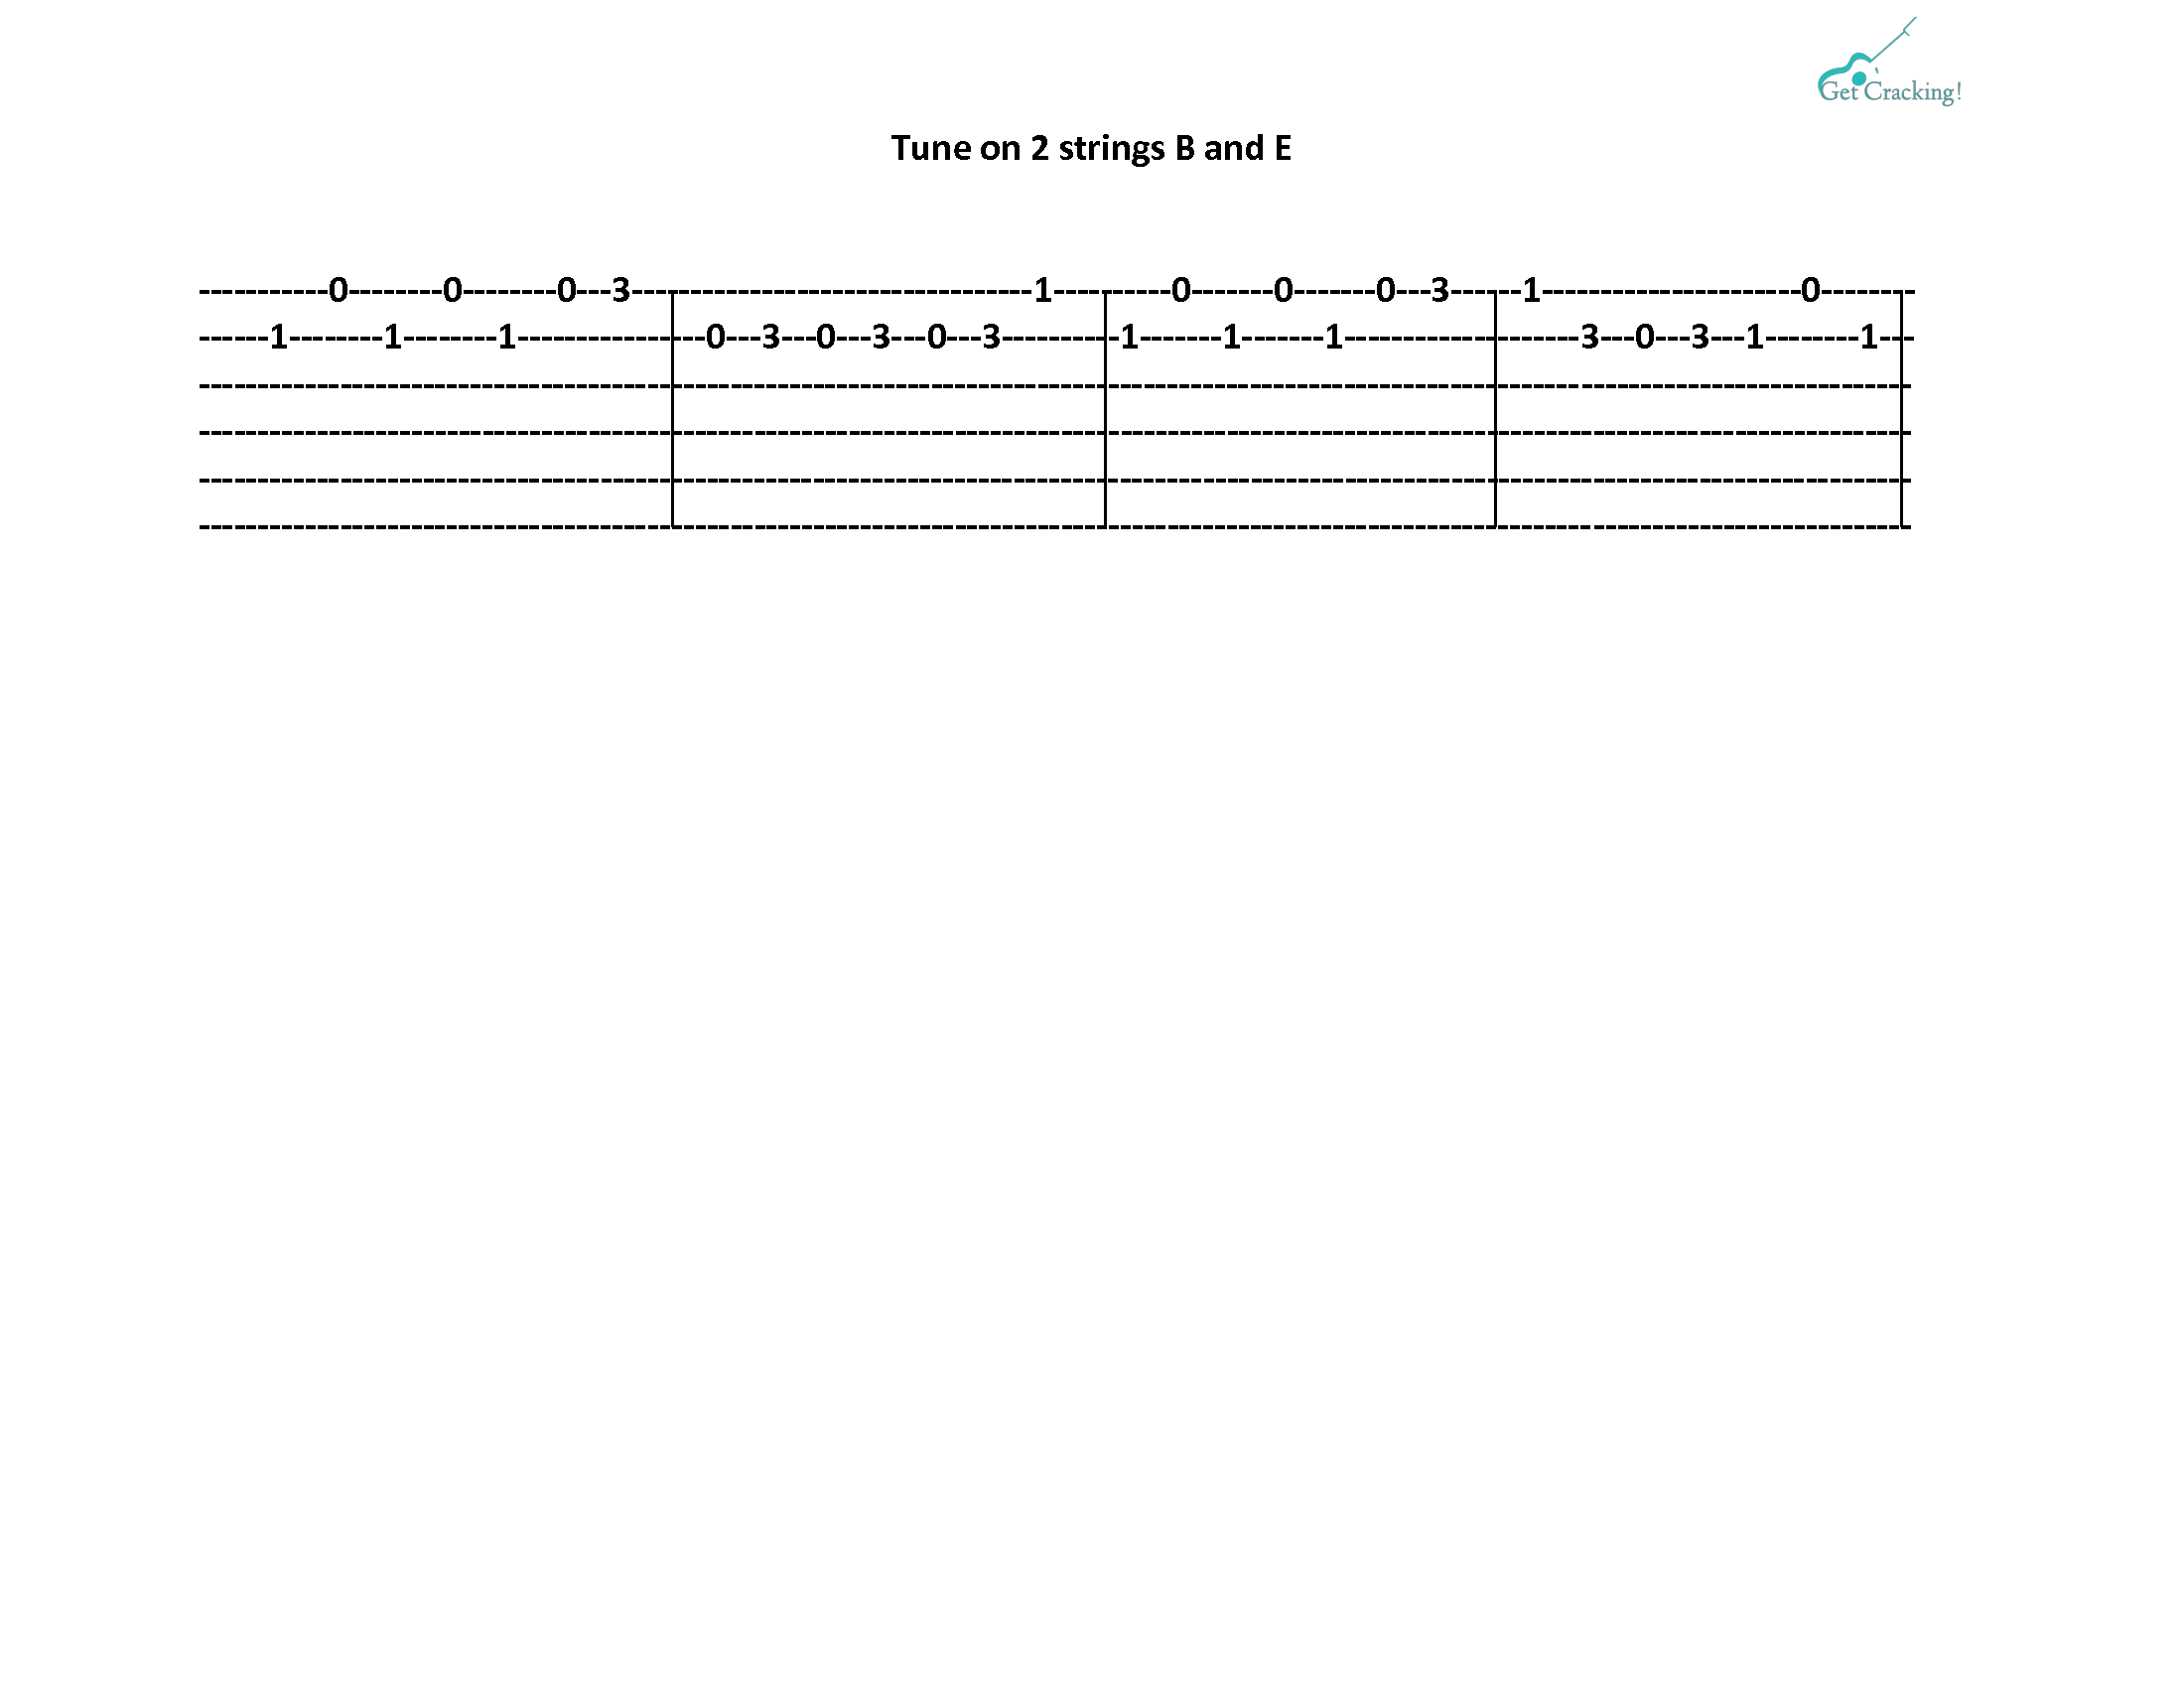 b tabs tune on 2 strings b and e